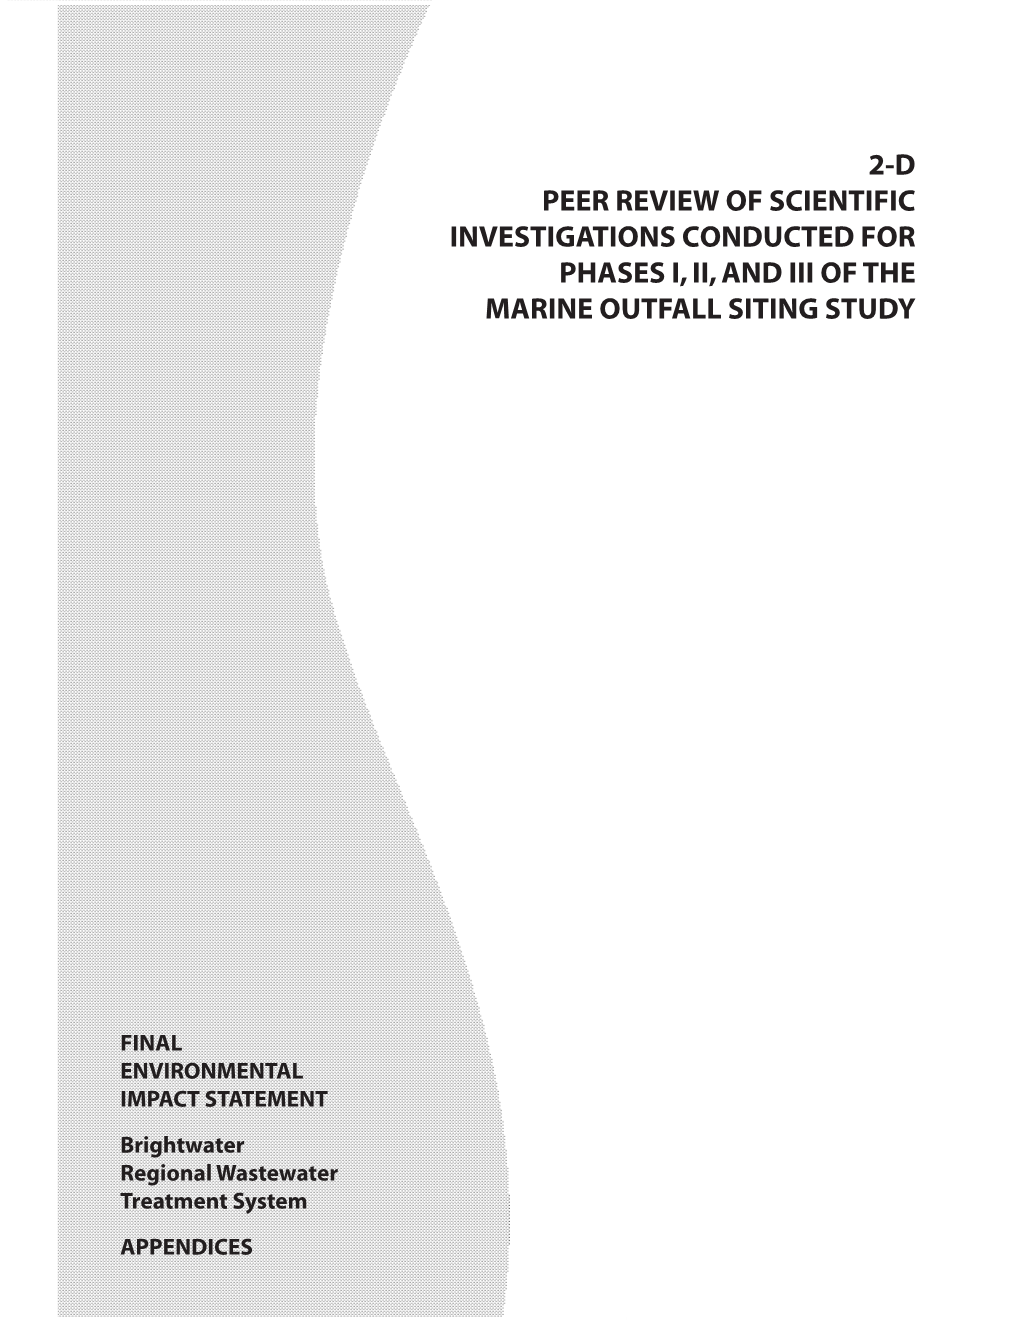 2-D Peer Review of Scientific Investigations Conducted for Phases I, Ii, and Iii of the Marine Outfall Siting Study